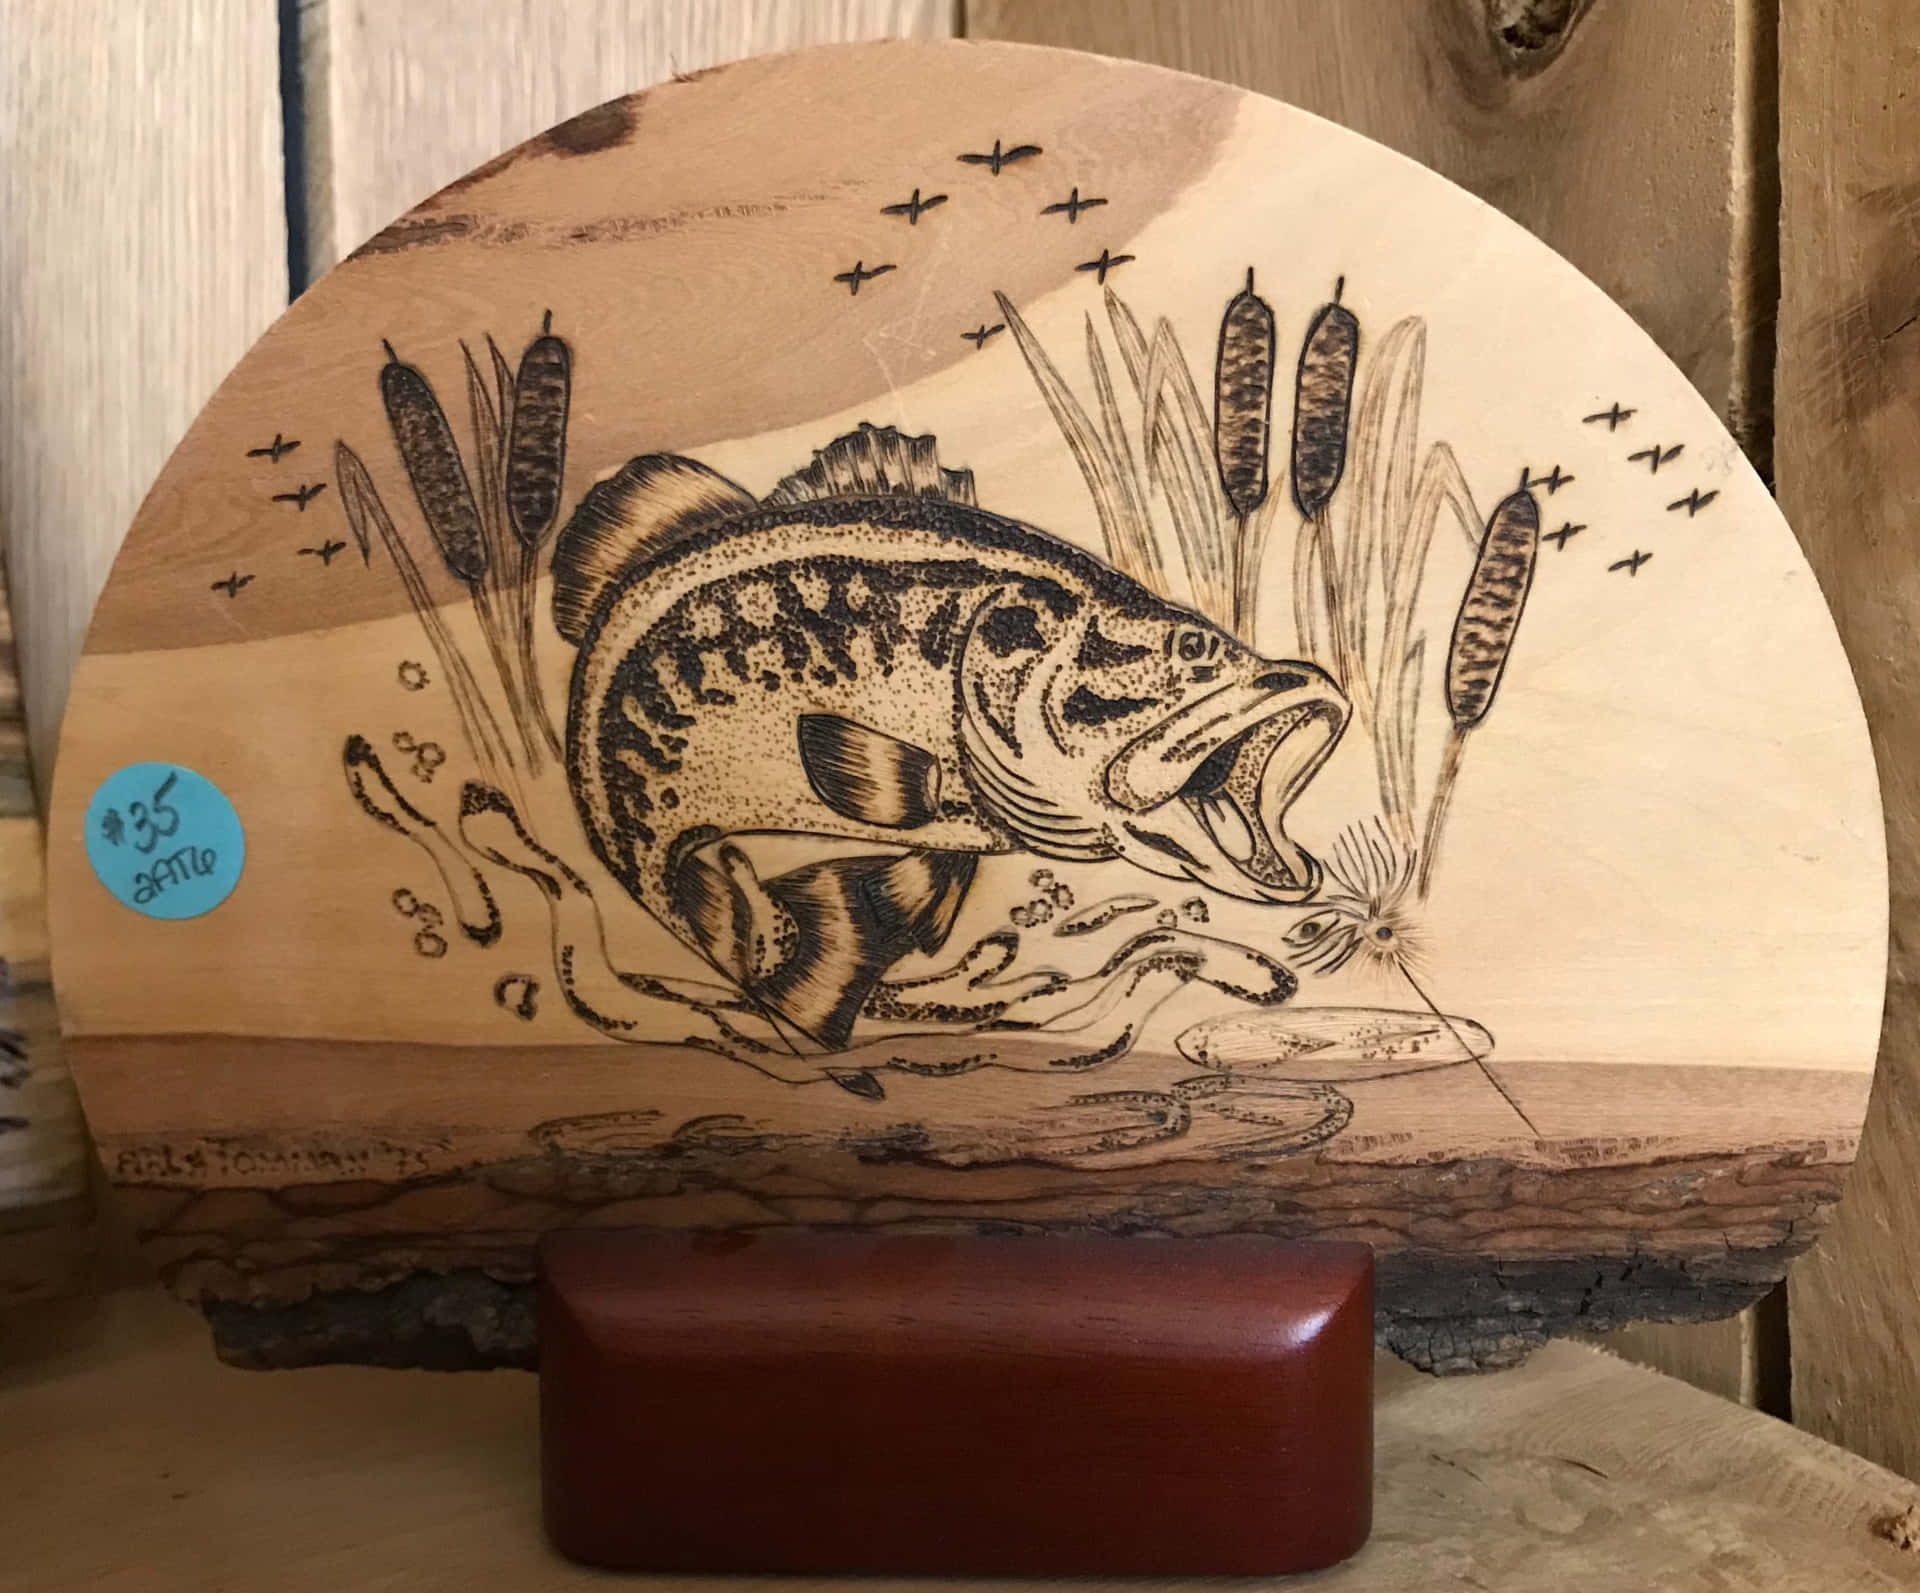 A Wooden Plaque With A Fish On It